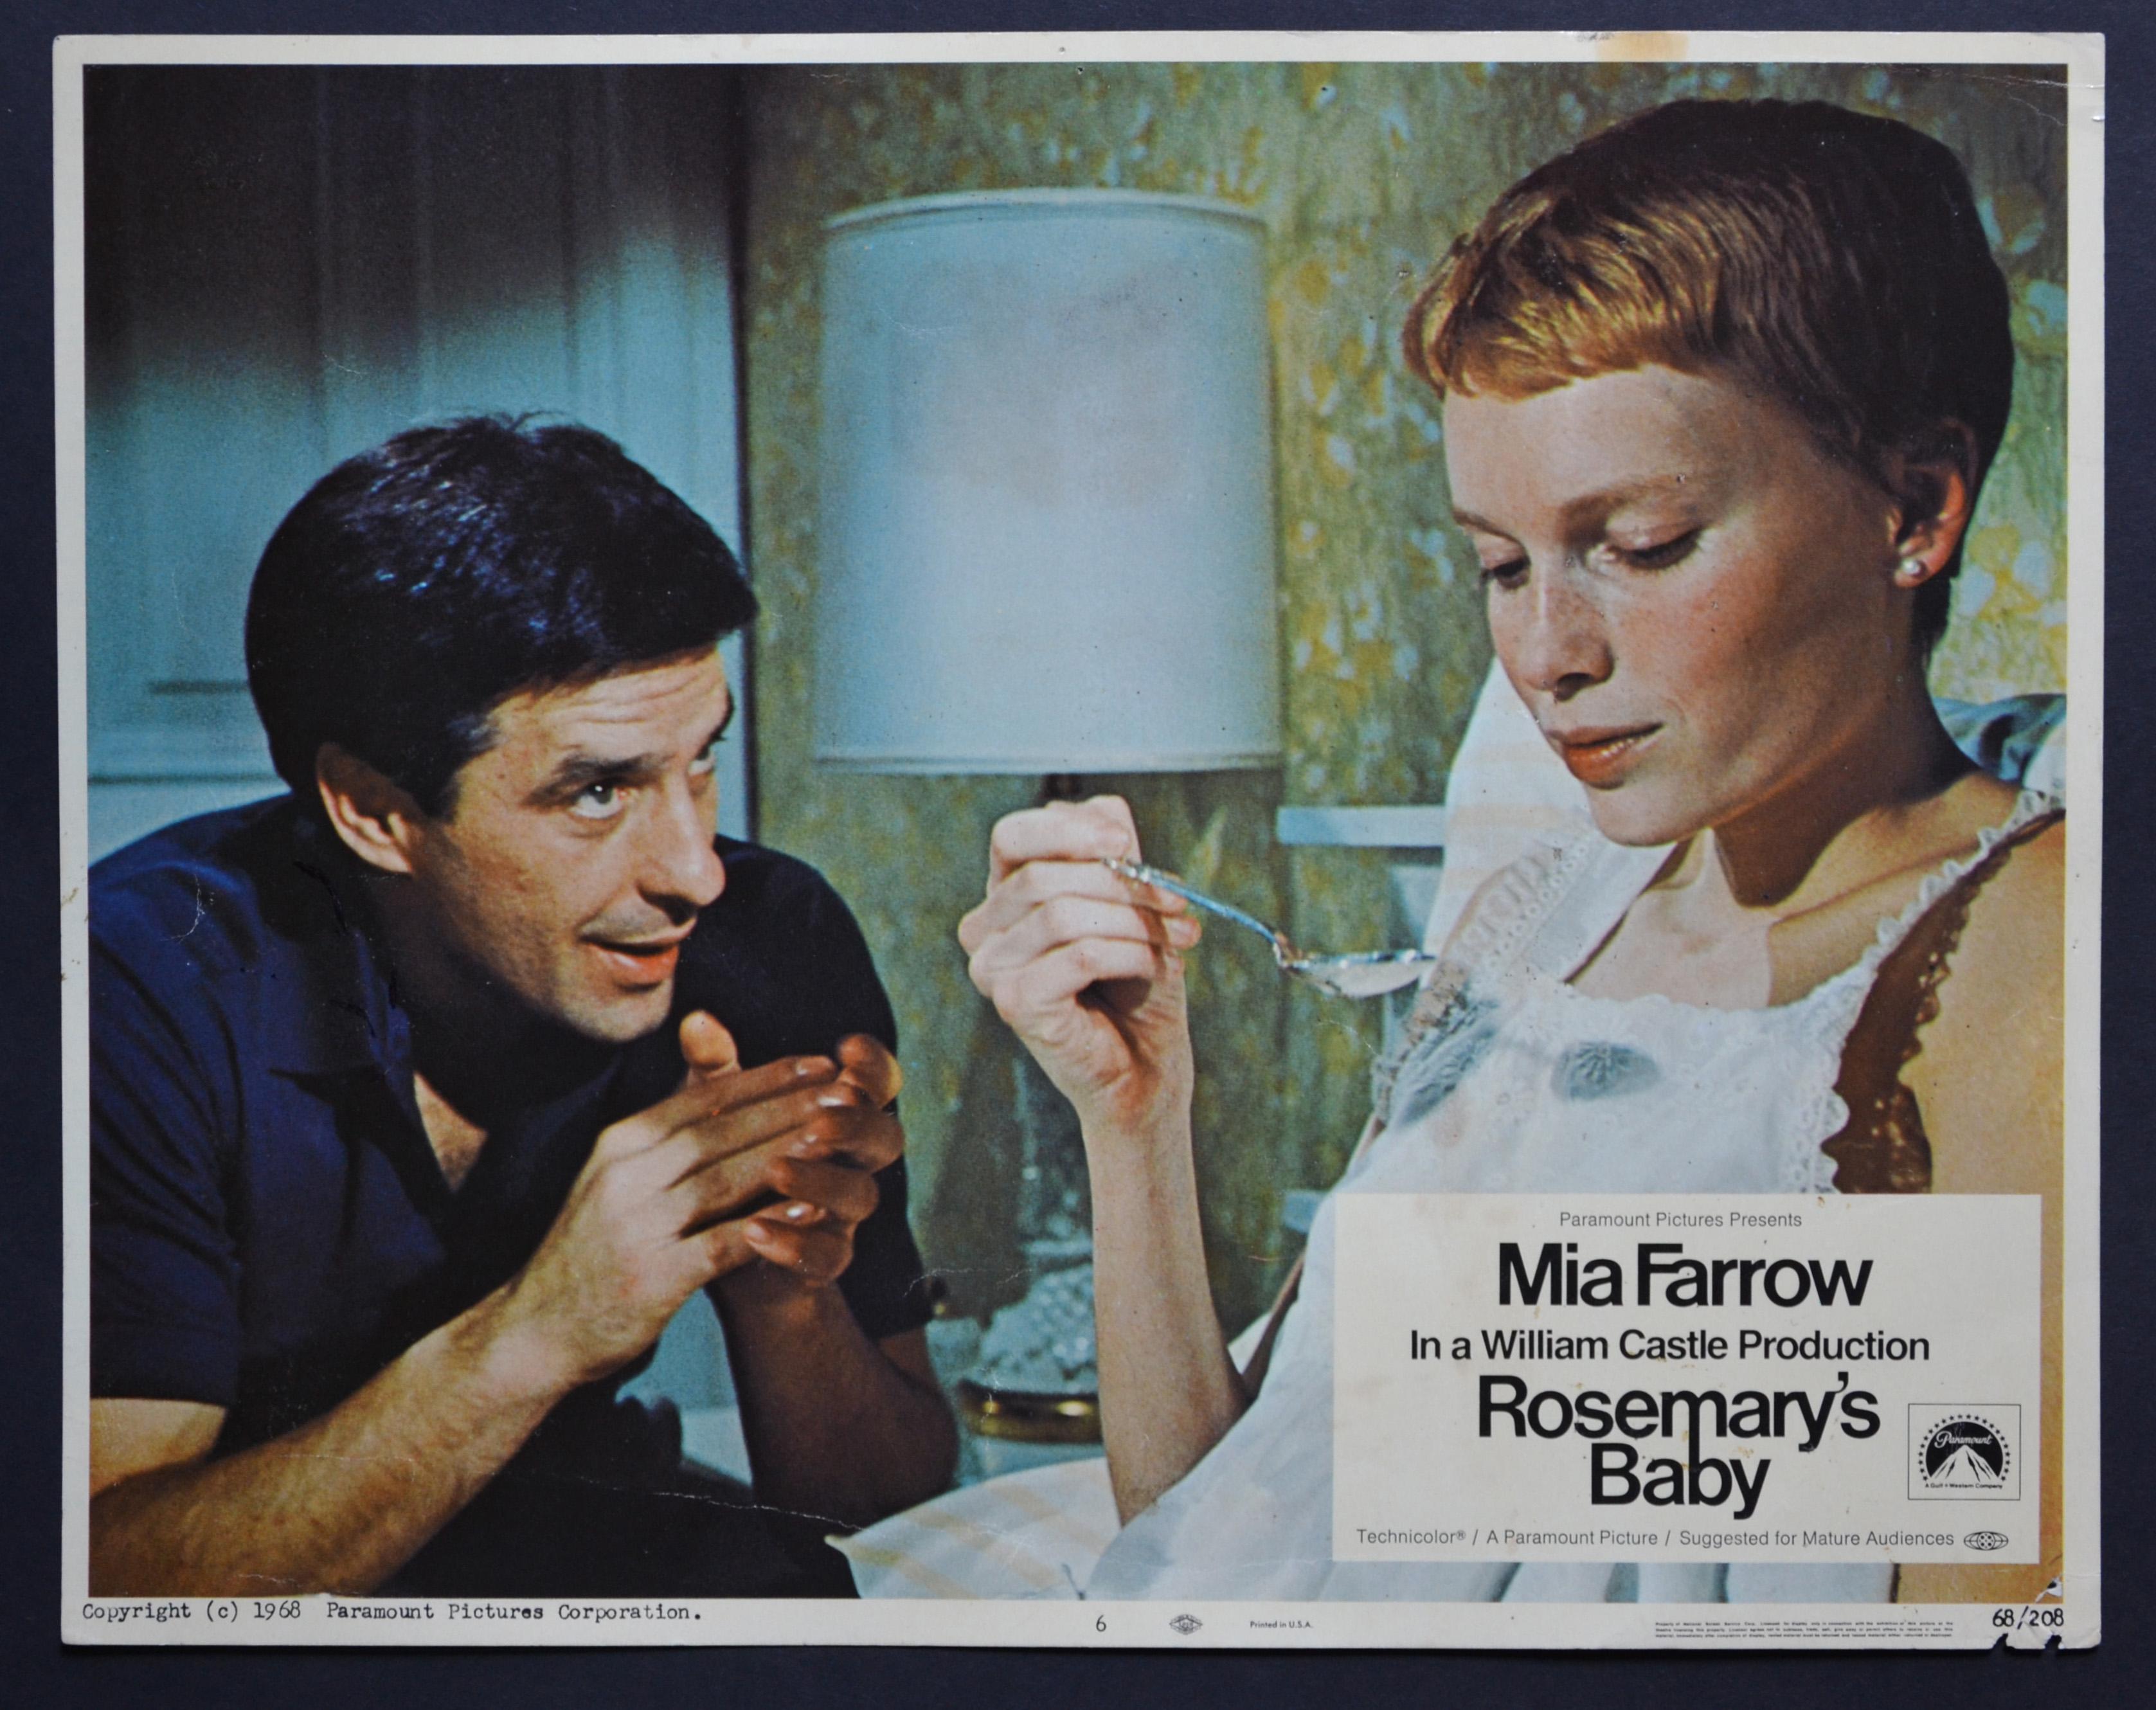 "Rosemary's Baby Vintage American Lobby Card of the Movie, USA 1968. – Art von Unknown